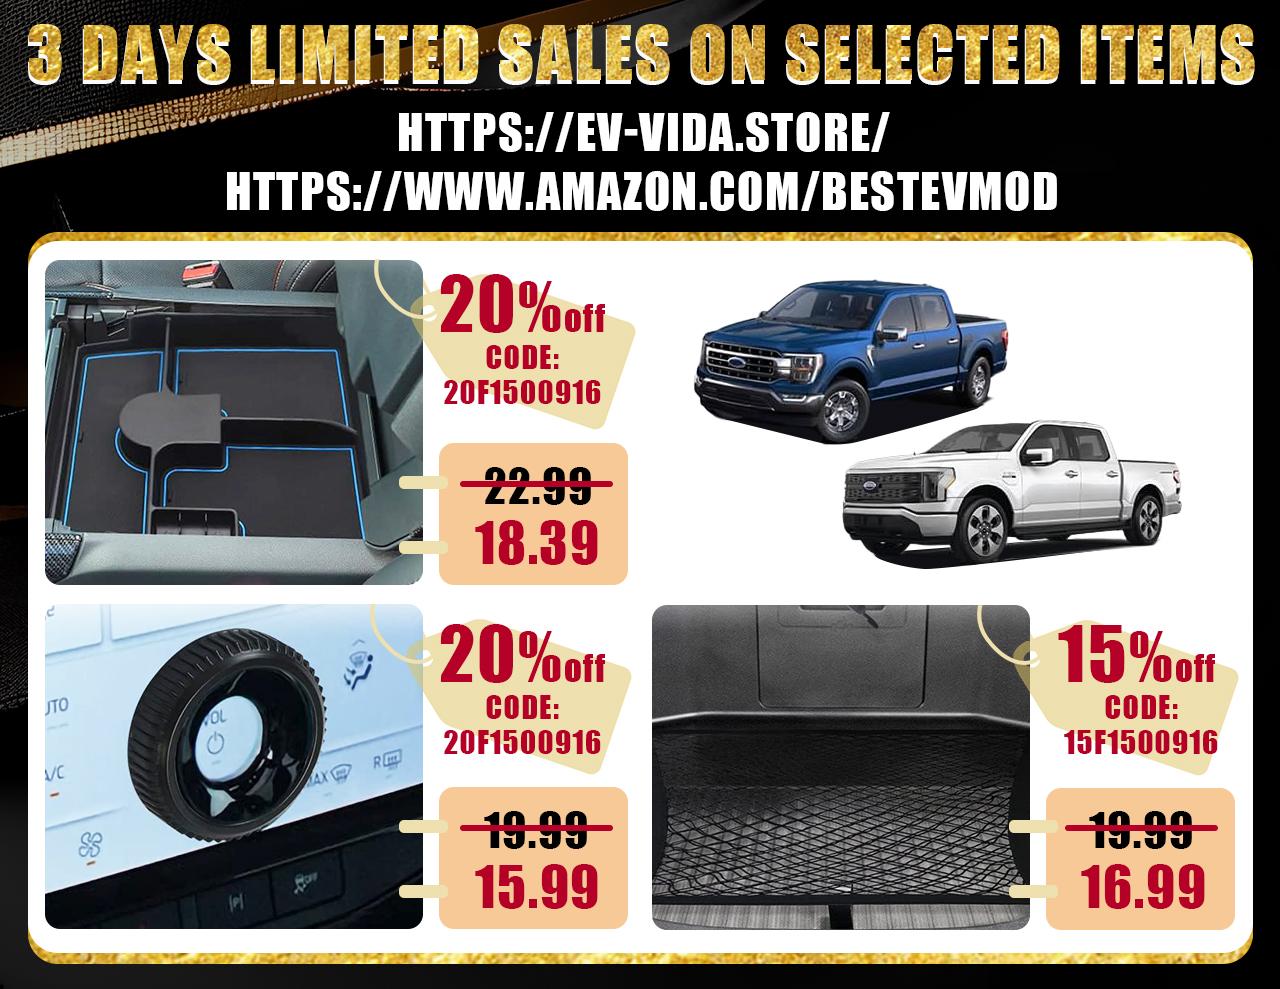 Ford F-150 Lightning 【AOSK BestEvMod】9/15 Sales on Selected items and New Product Alert(3 days limited) f150